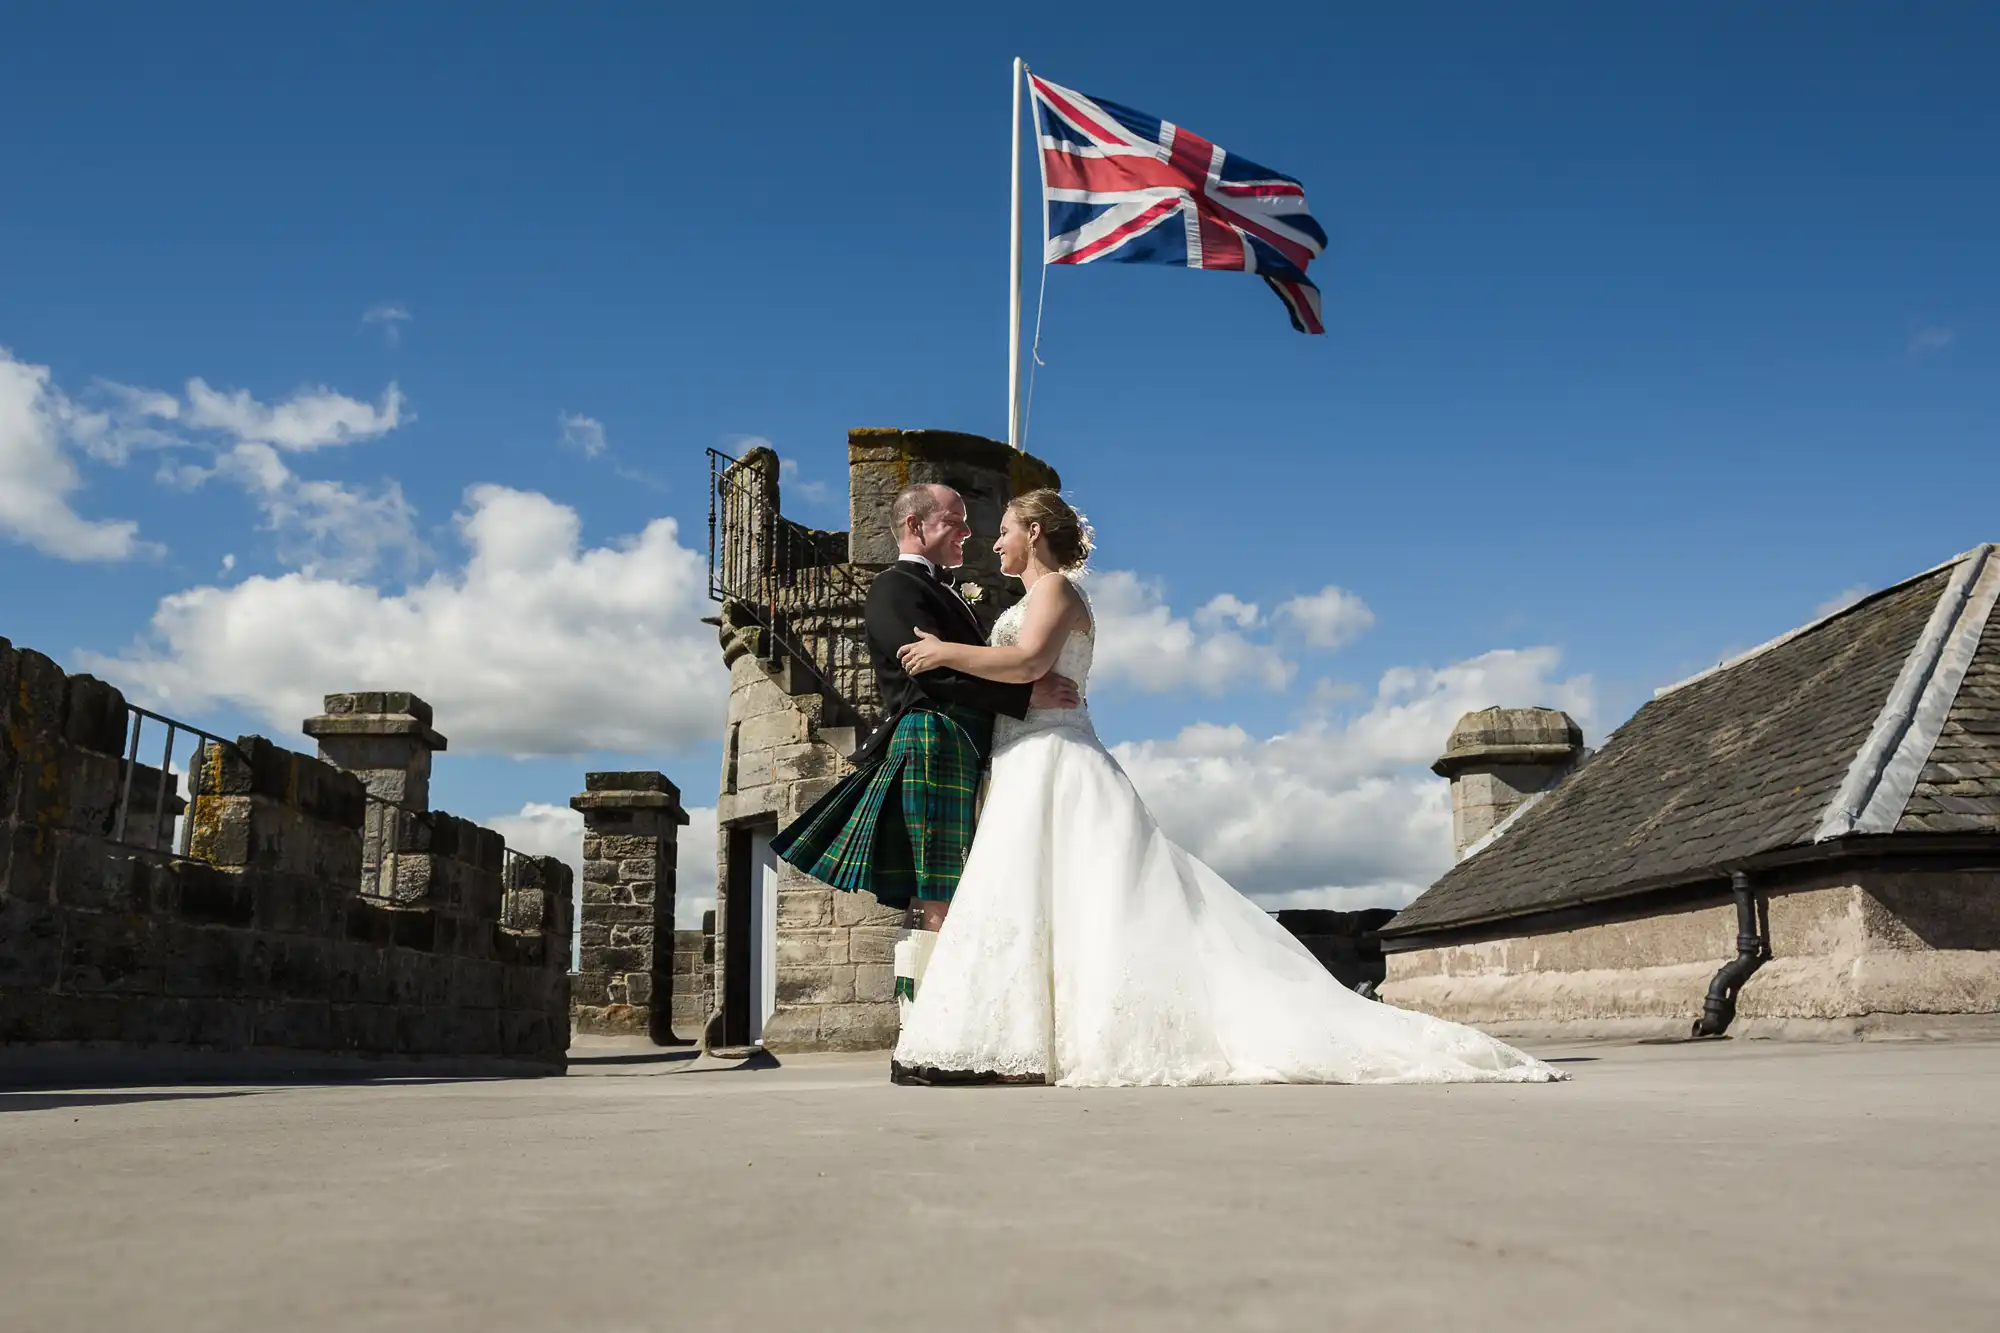 A couple stands on a rooftop under a Union Jack flag; the man wears a kilt and the woman a wedding dress, both in a loving embrace. Stone towers and a blue sky with clouds are in the background.